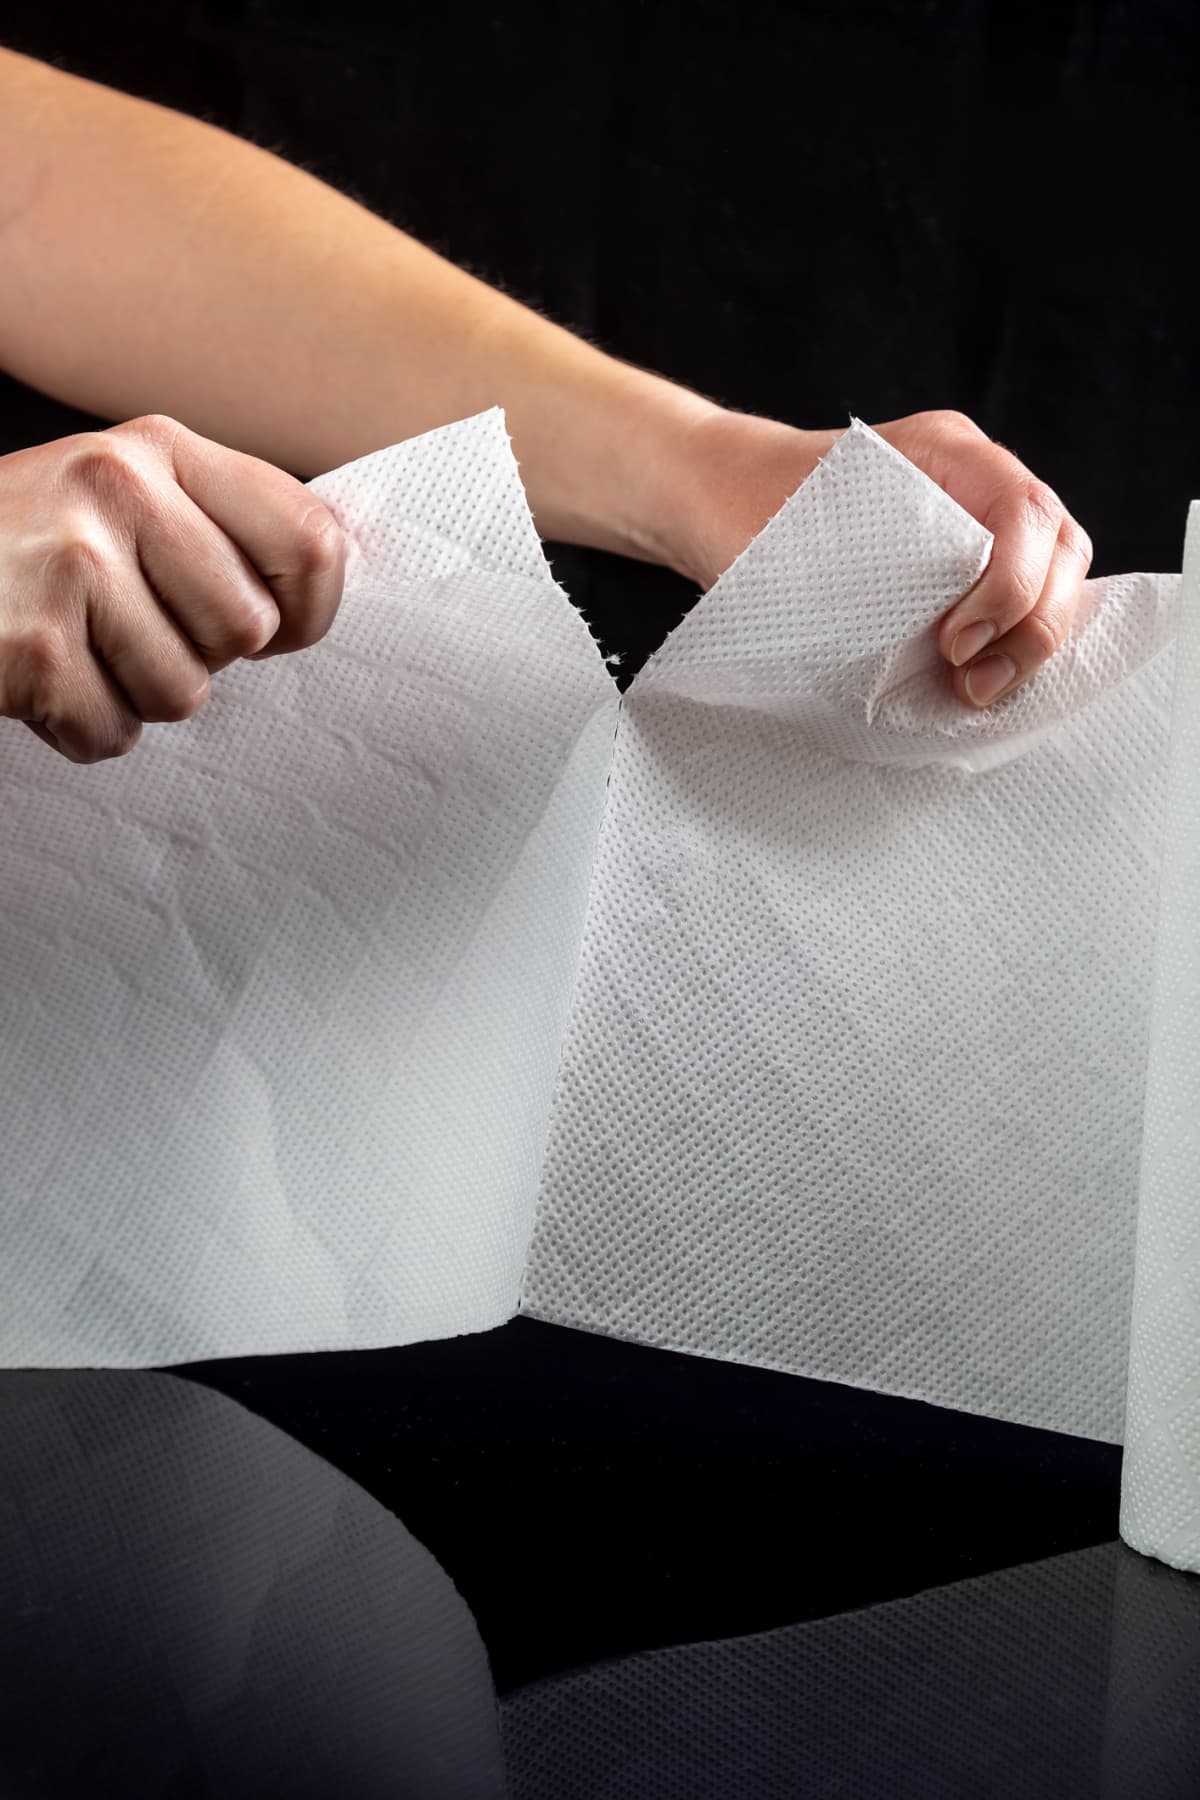 person tearing a sheet of paper towel